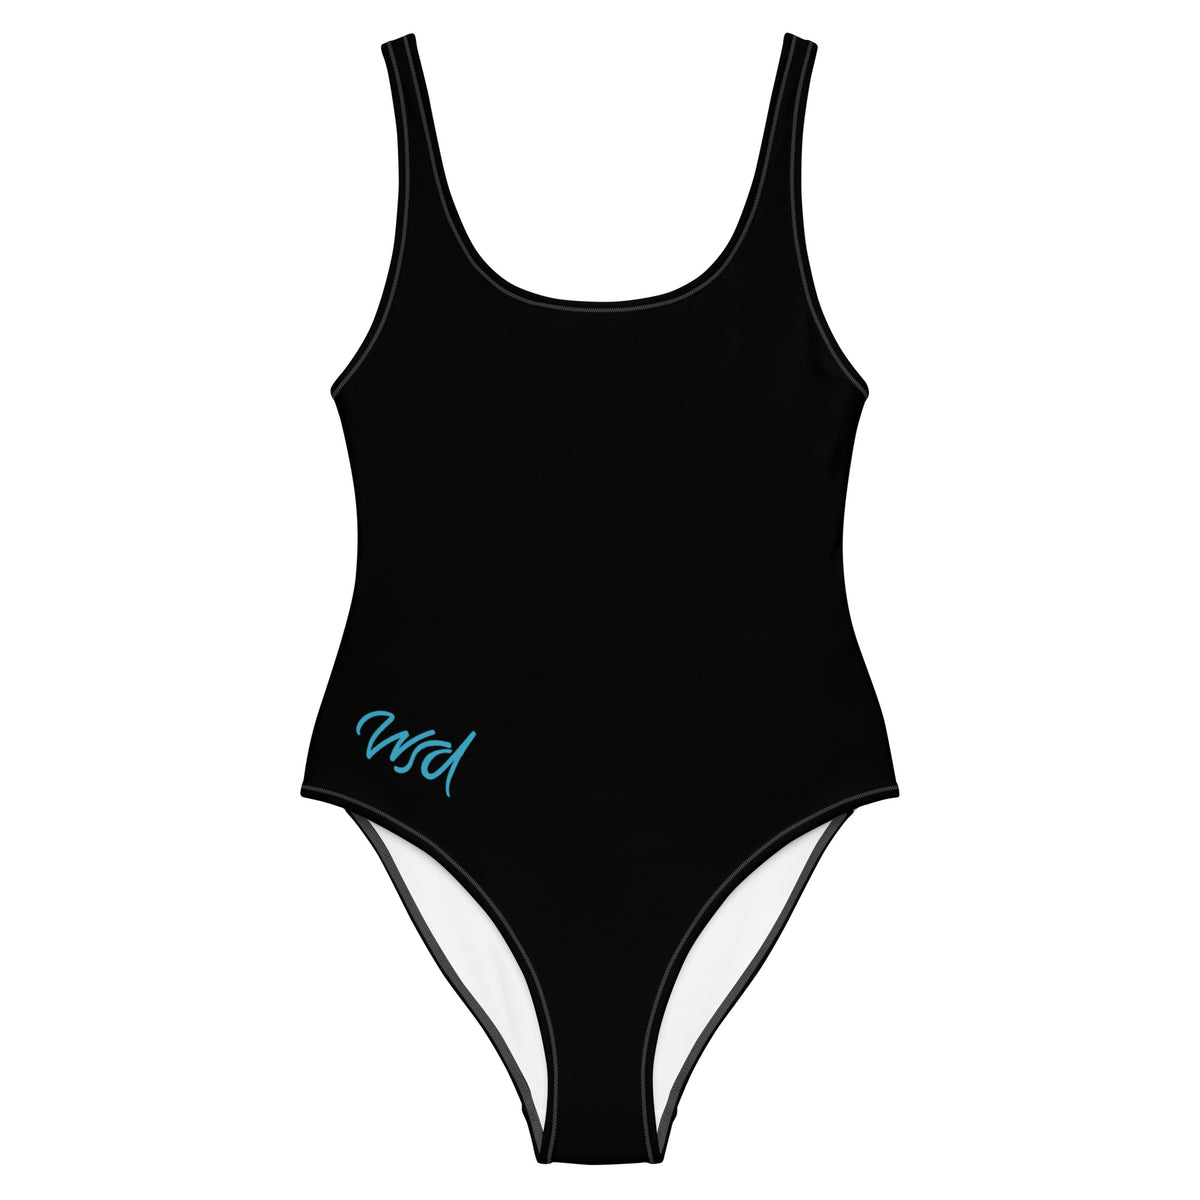 Wsd Women S One Piece Swimsuit Pack For Camp